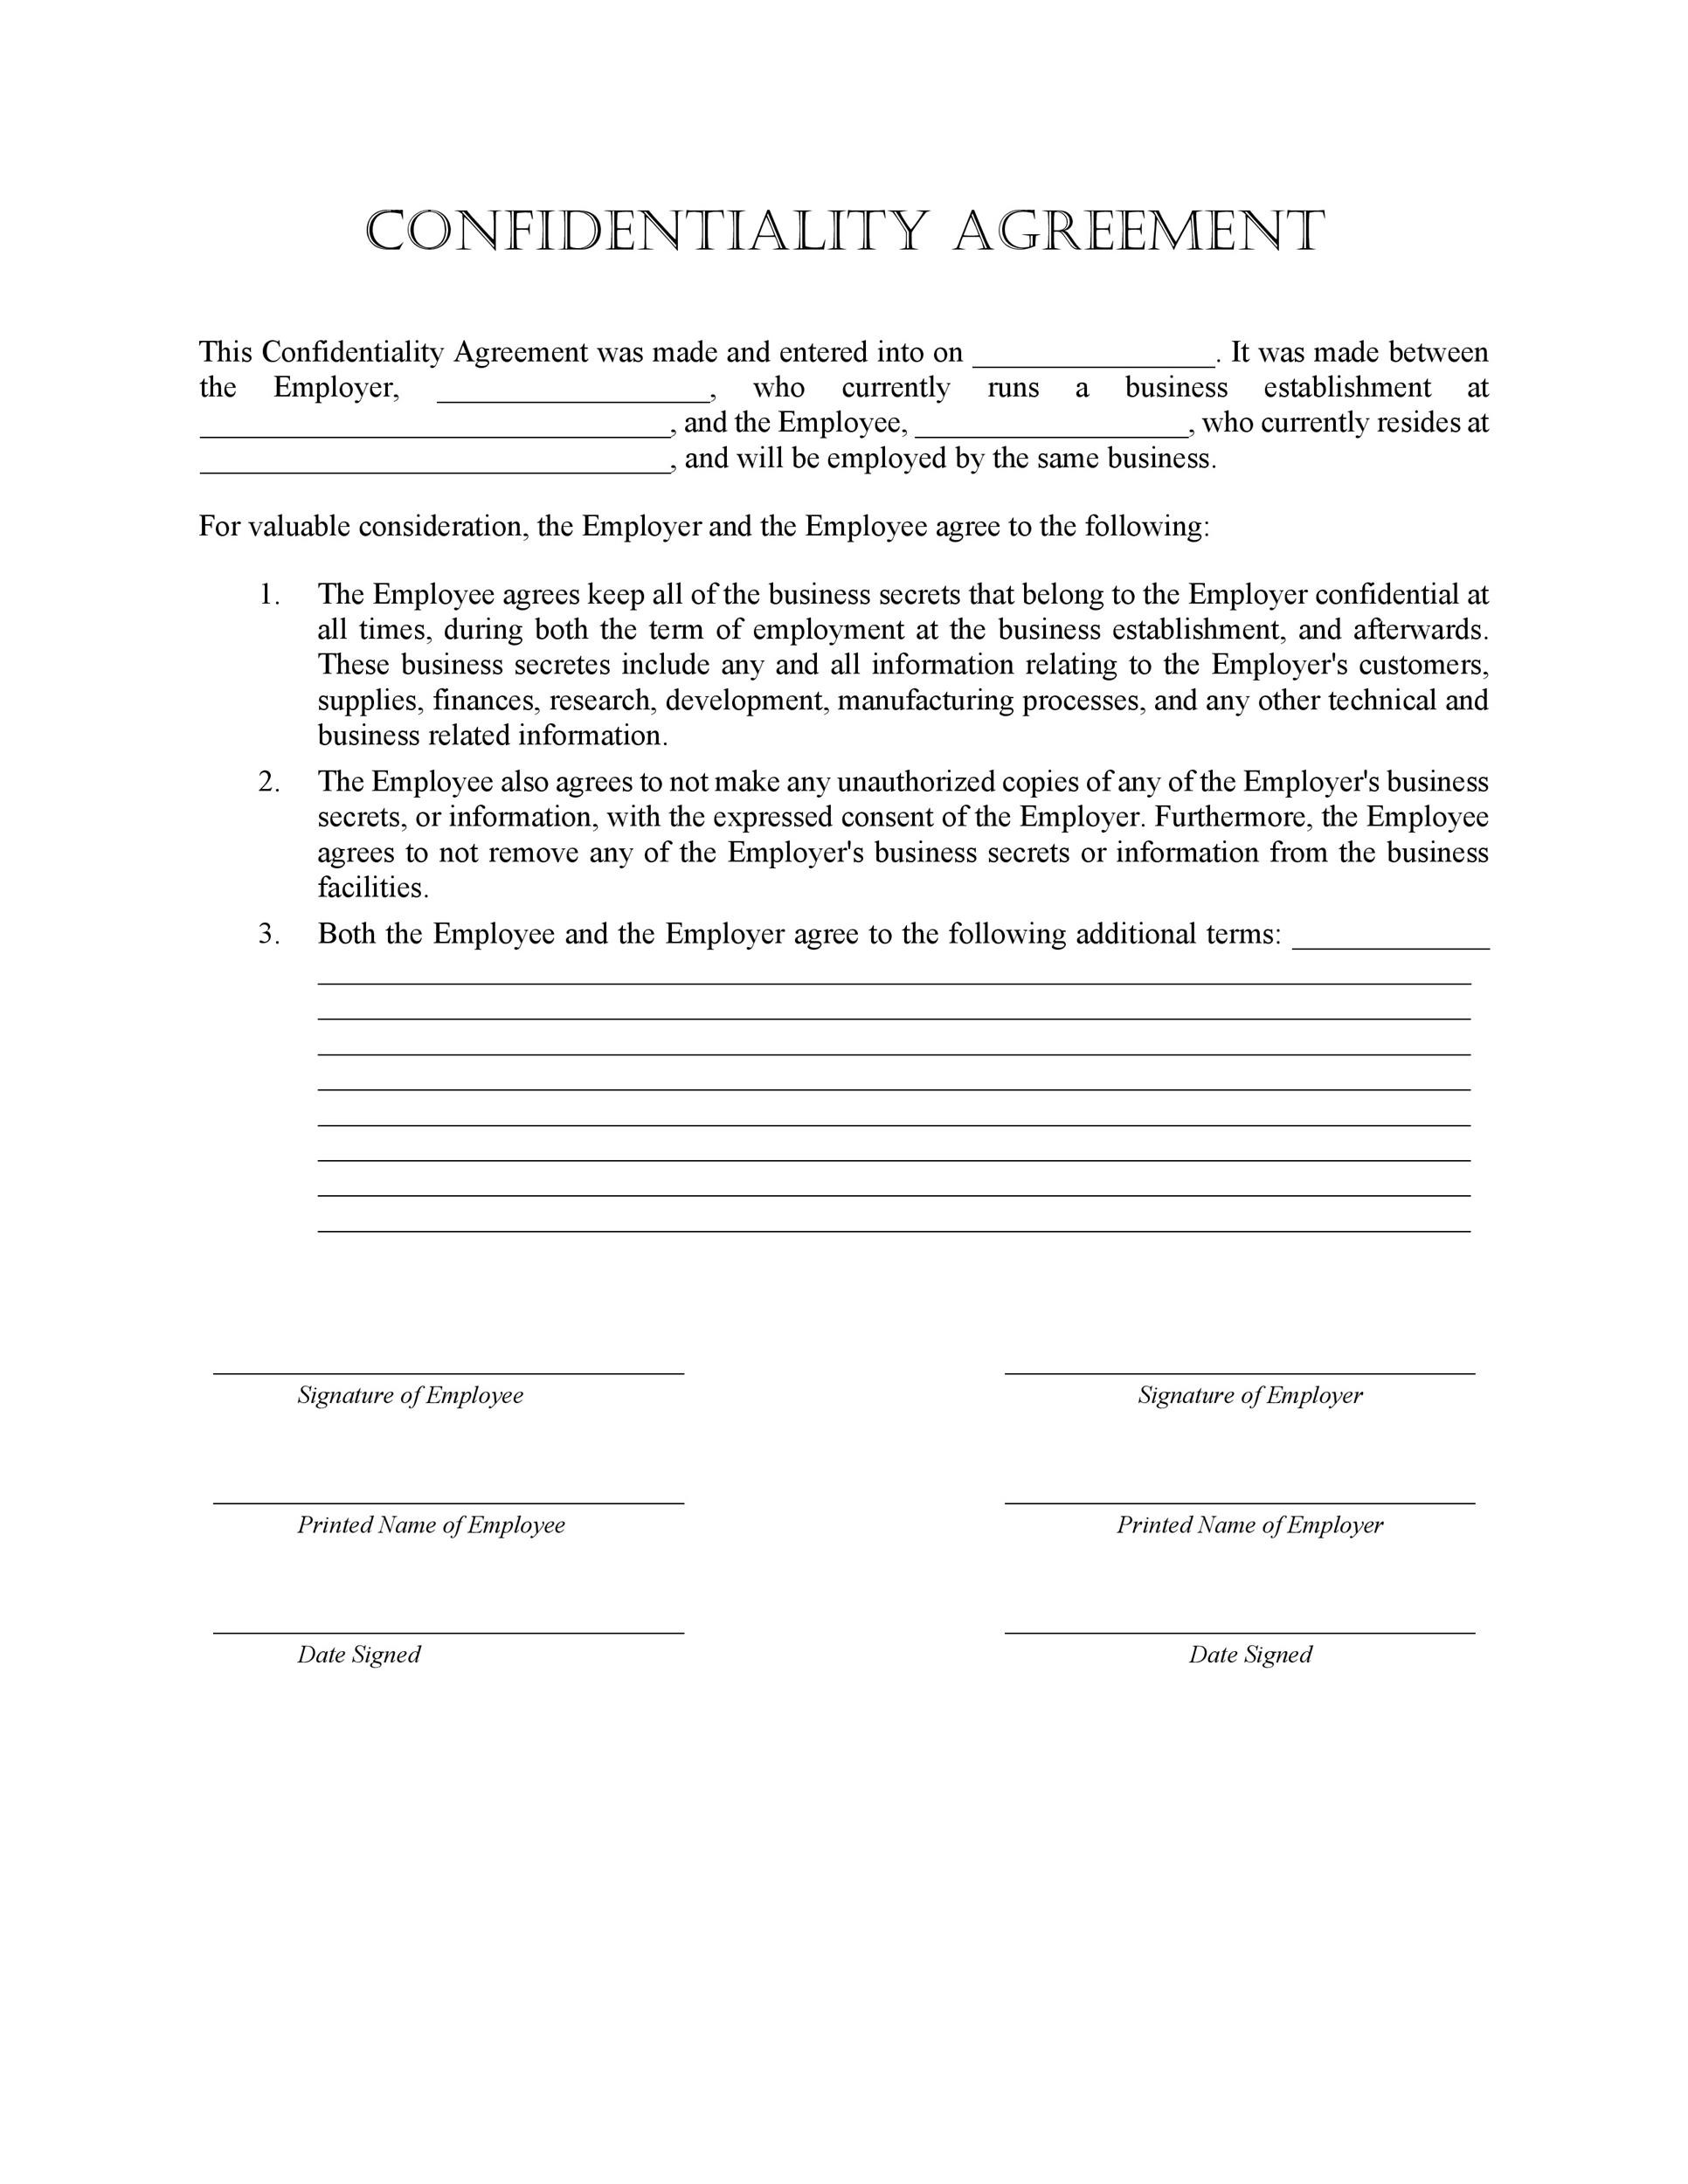 40 Non Disclosure Agreement Templates Samples Forms TemplateLab